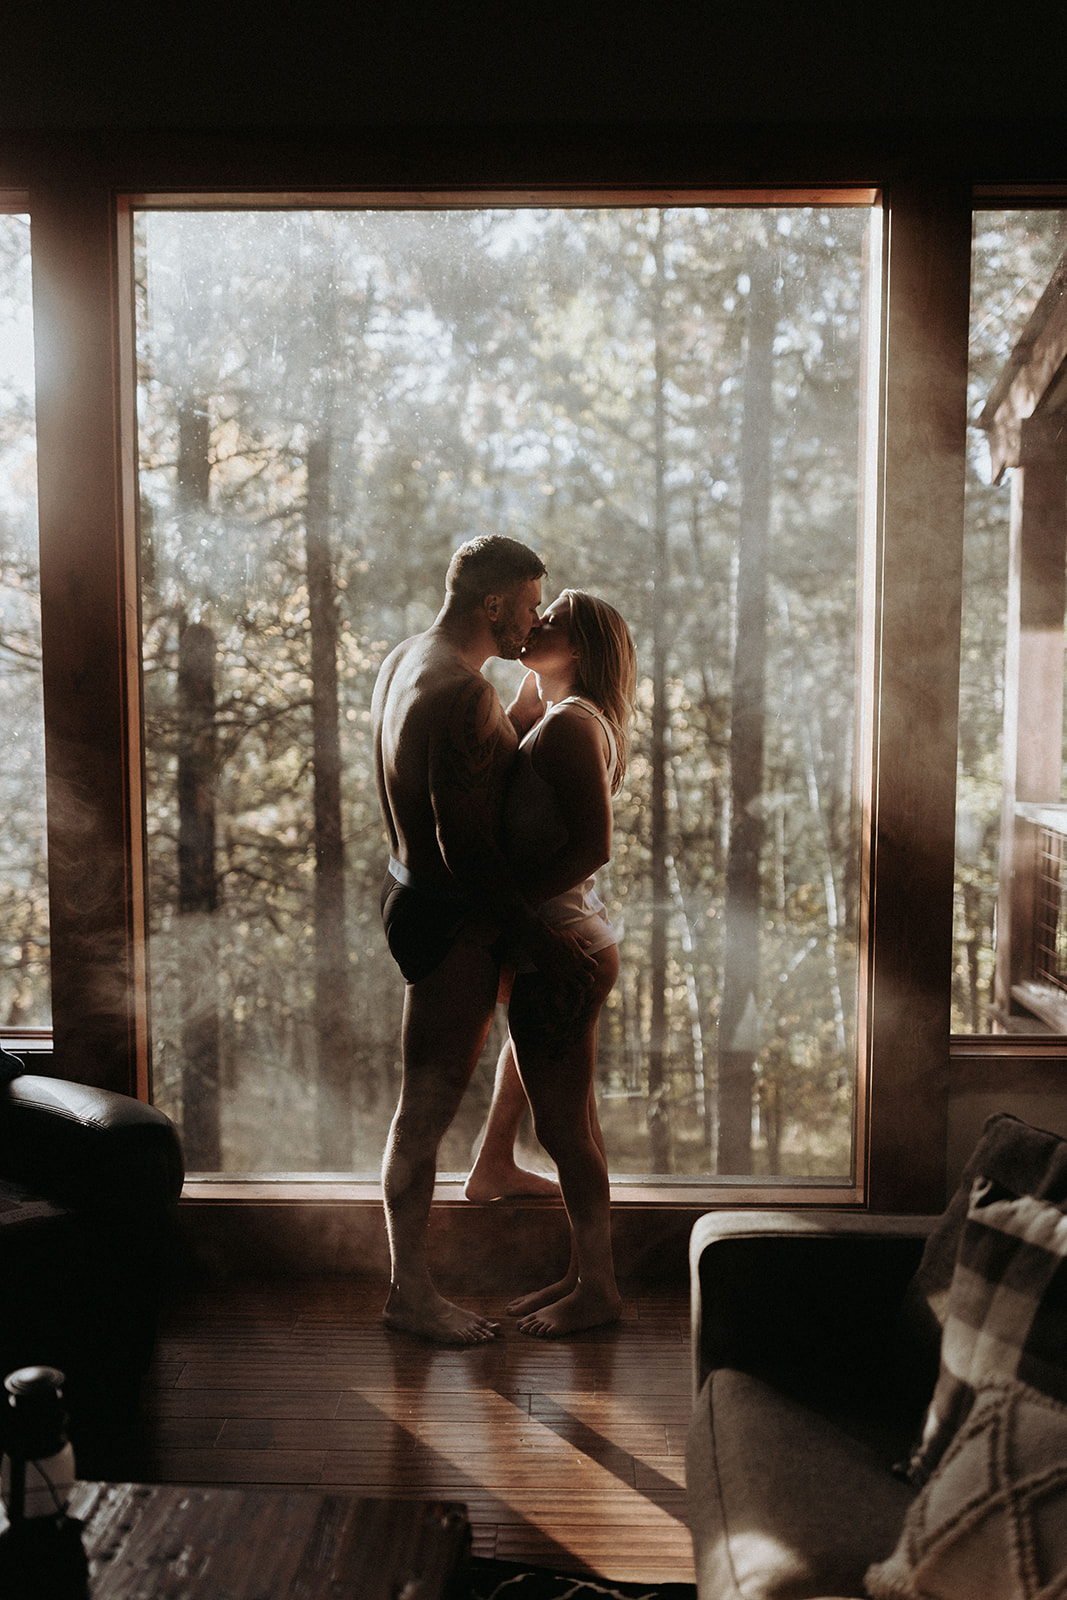 A couple kissing in their underwear in their airbnb with the forest outside the window in the background.